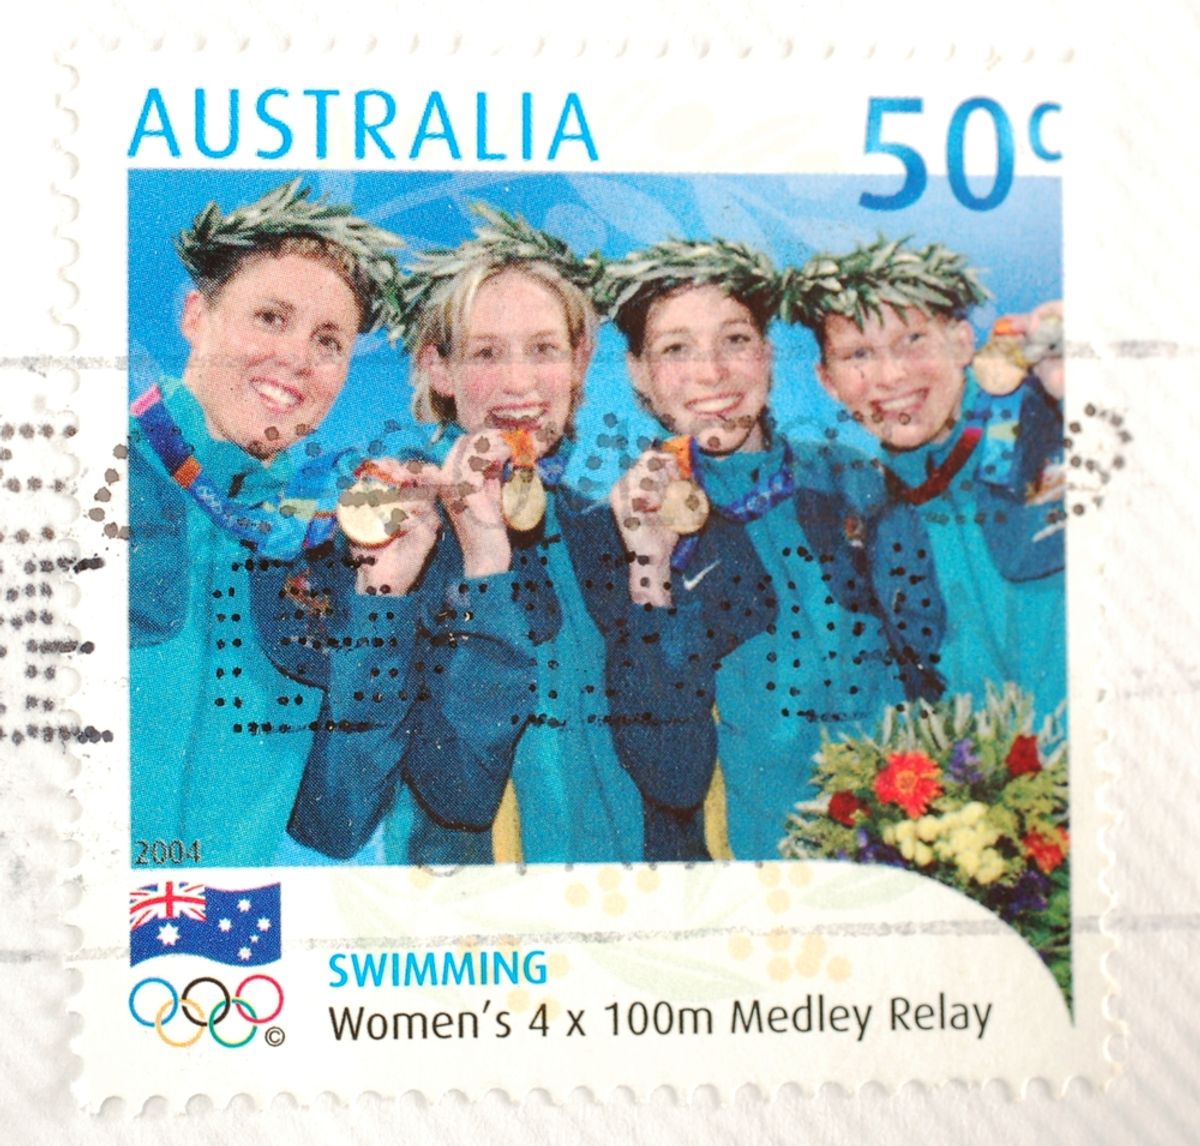 A stamp from Australia shows image of the gold medal winning women's 4x100m medley relay team from the Athens Olympics, circa 2004    (<a href="http://www.shutterstock.com/gallery-166210p1.html?cr=00&pl=edit-00">Brendan Howard</a> / <a href="http://www.shutterstock.com/?cr=00&pl=edit-00">Shutterstock.com</a>)